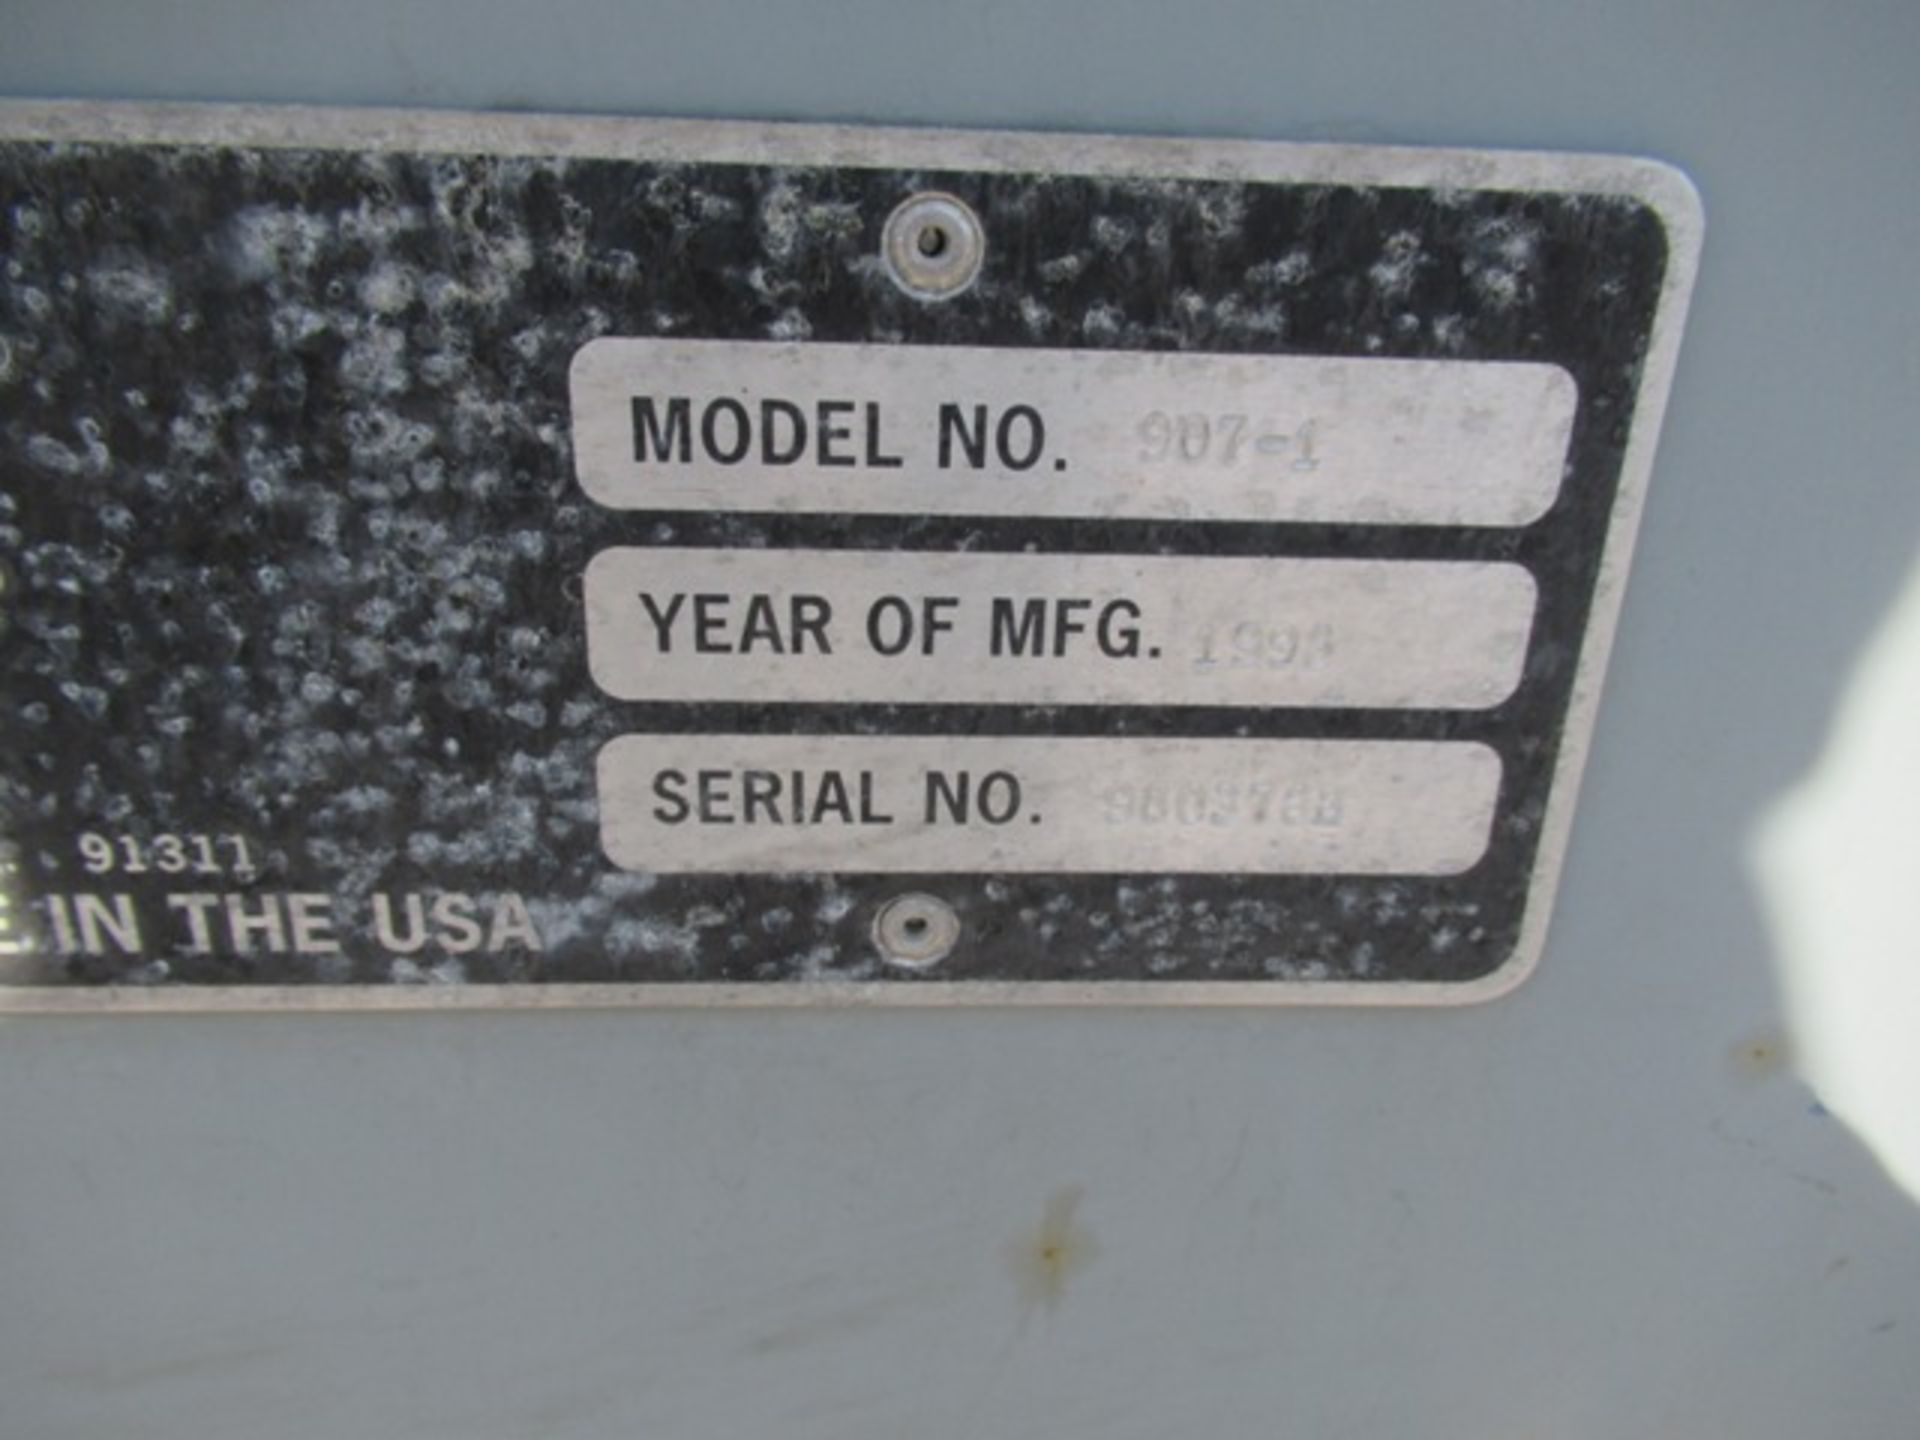 1996 FADAL MODEL 907-1 VERTICAL MACHINING CENTER, S/N 9803788 (NOTE: MACHINE AS-IS) - Image 4 of 5